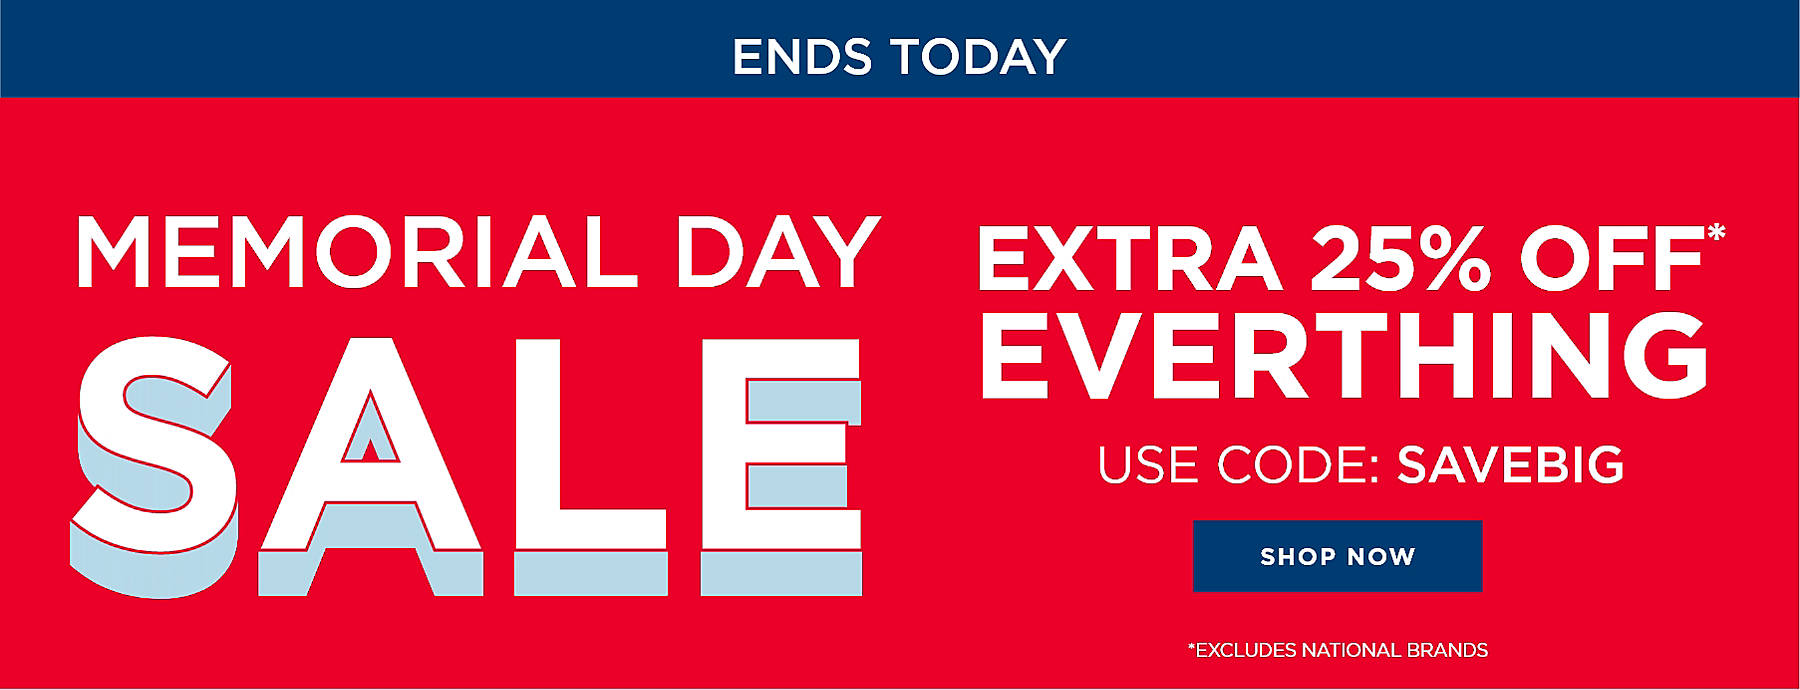 Ends today Memorial Day Sale Extra 25% off* everything Use code: SAVEBIG Shop Now *Excludes National Brands